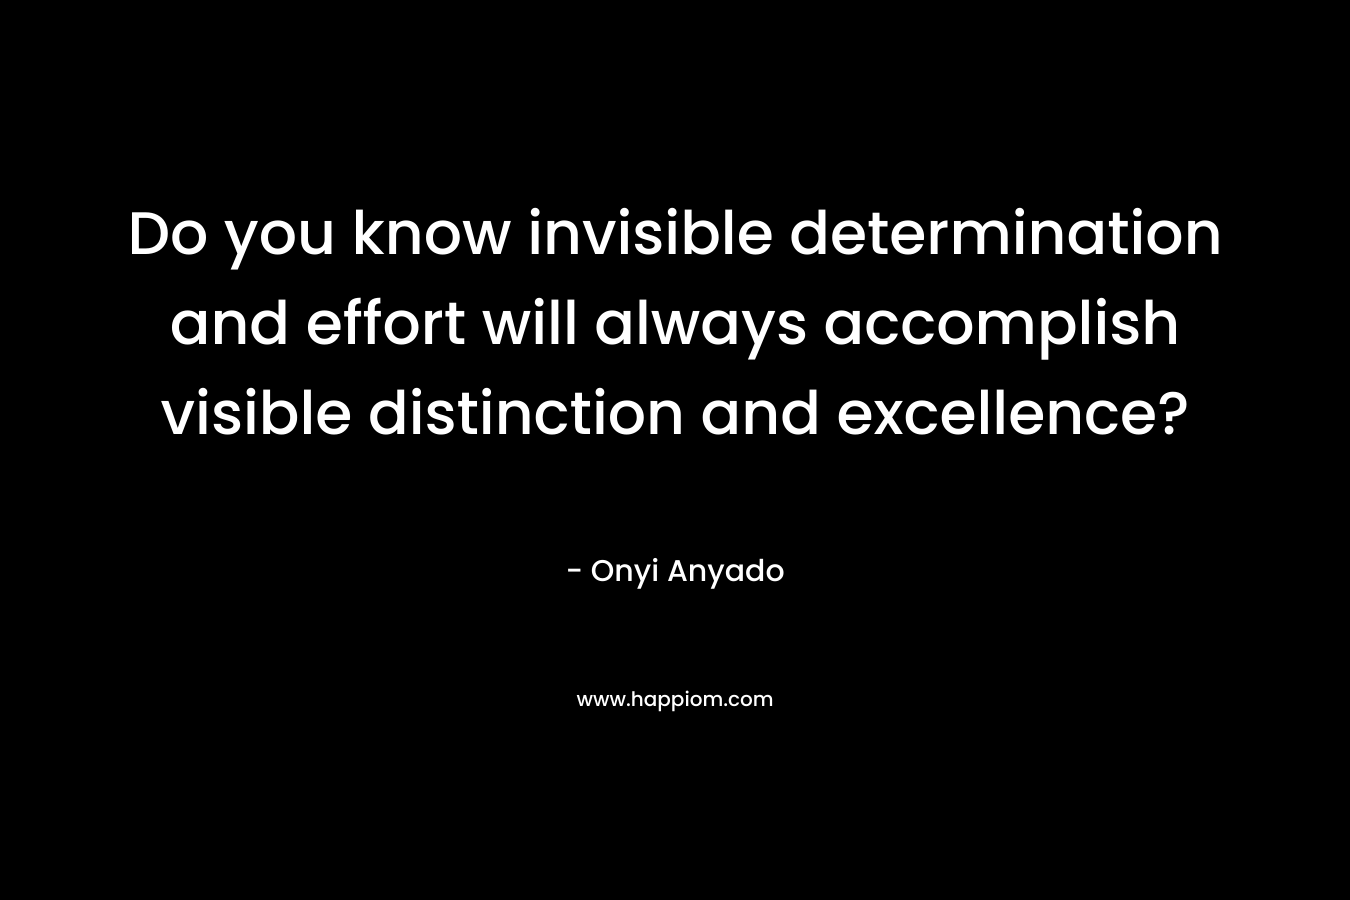 Do you know invisible determination and effort will always accomplish visible distinction and excellence? – Onyi Anyado